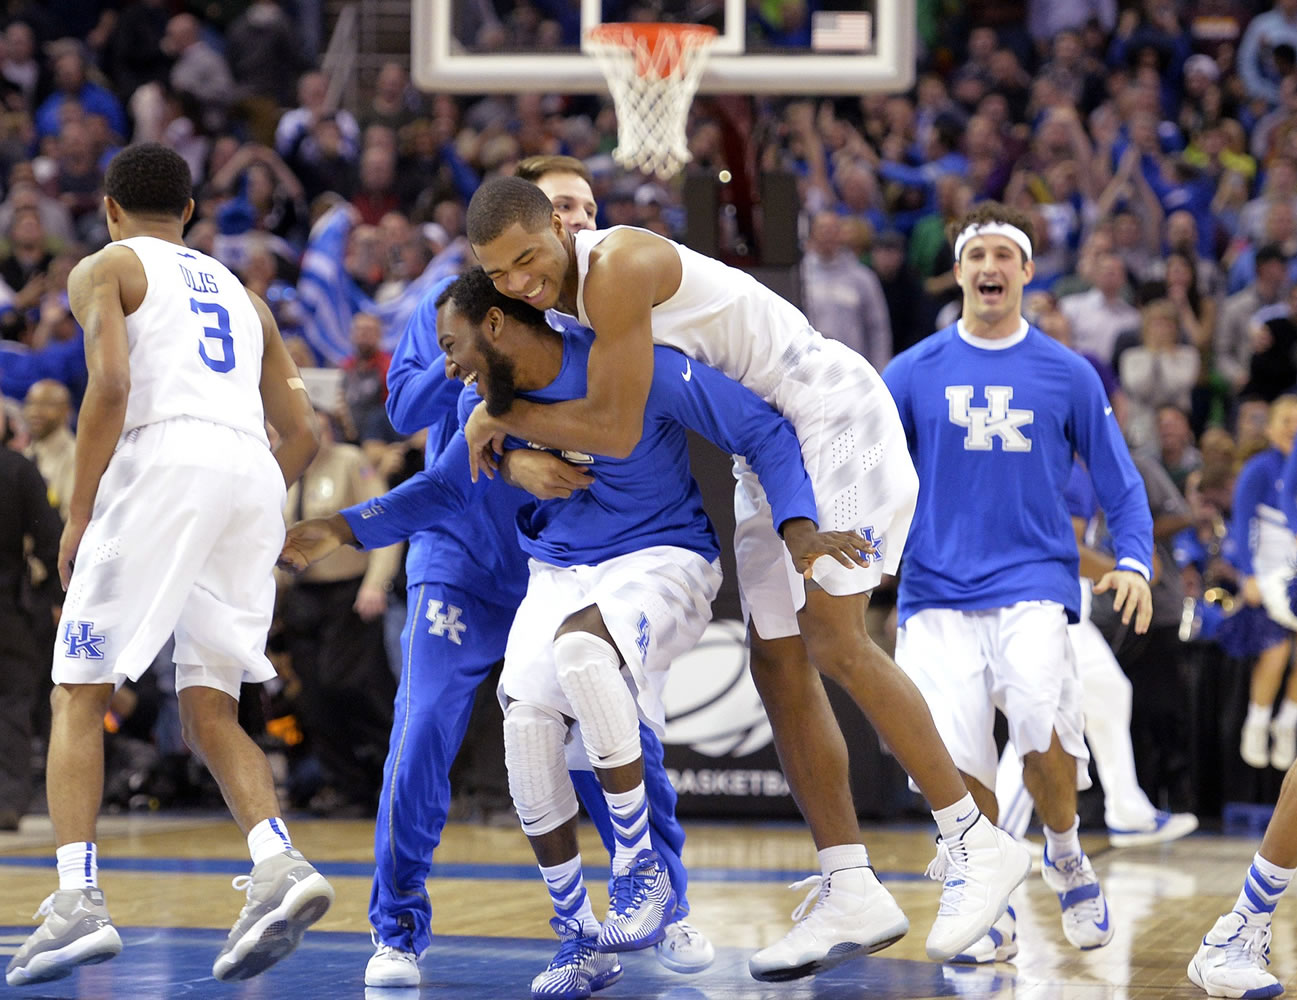 Kentucky players celebrate after a 68-66 win over Notre Dame in a college basketball game in the NCAA men's tournament regional finals, Saturday, March 28, 2015, in Cleveland.